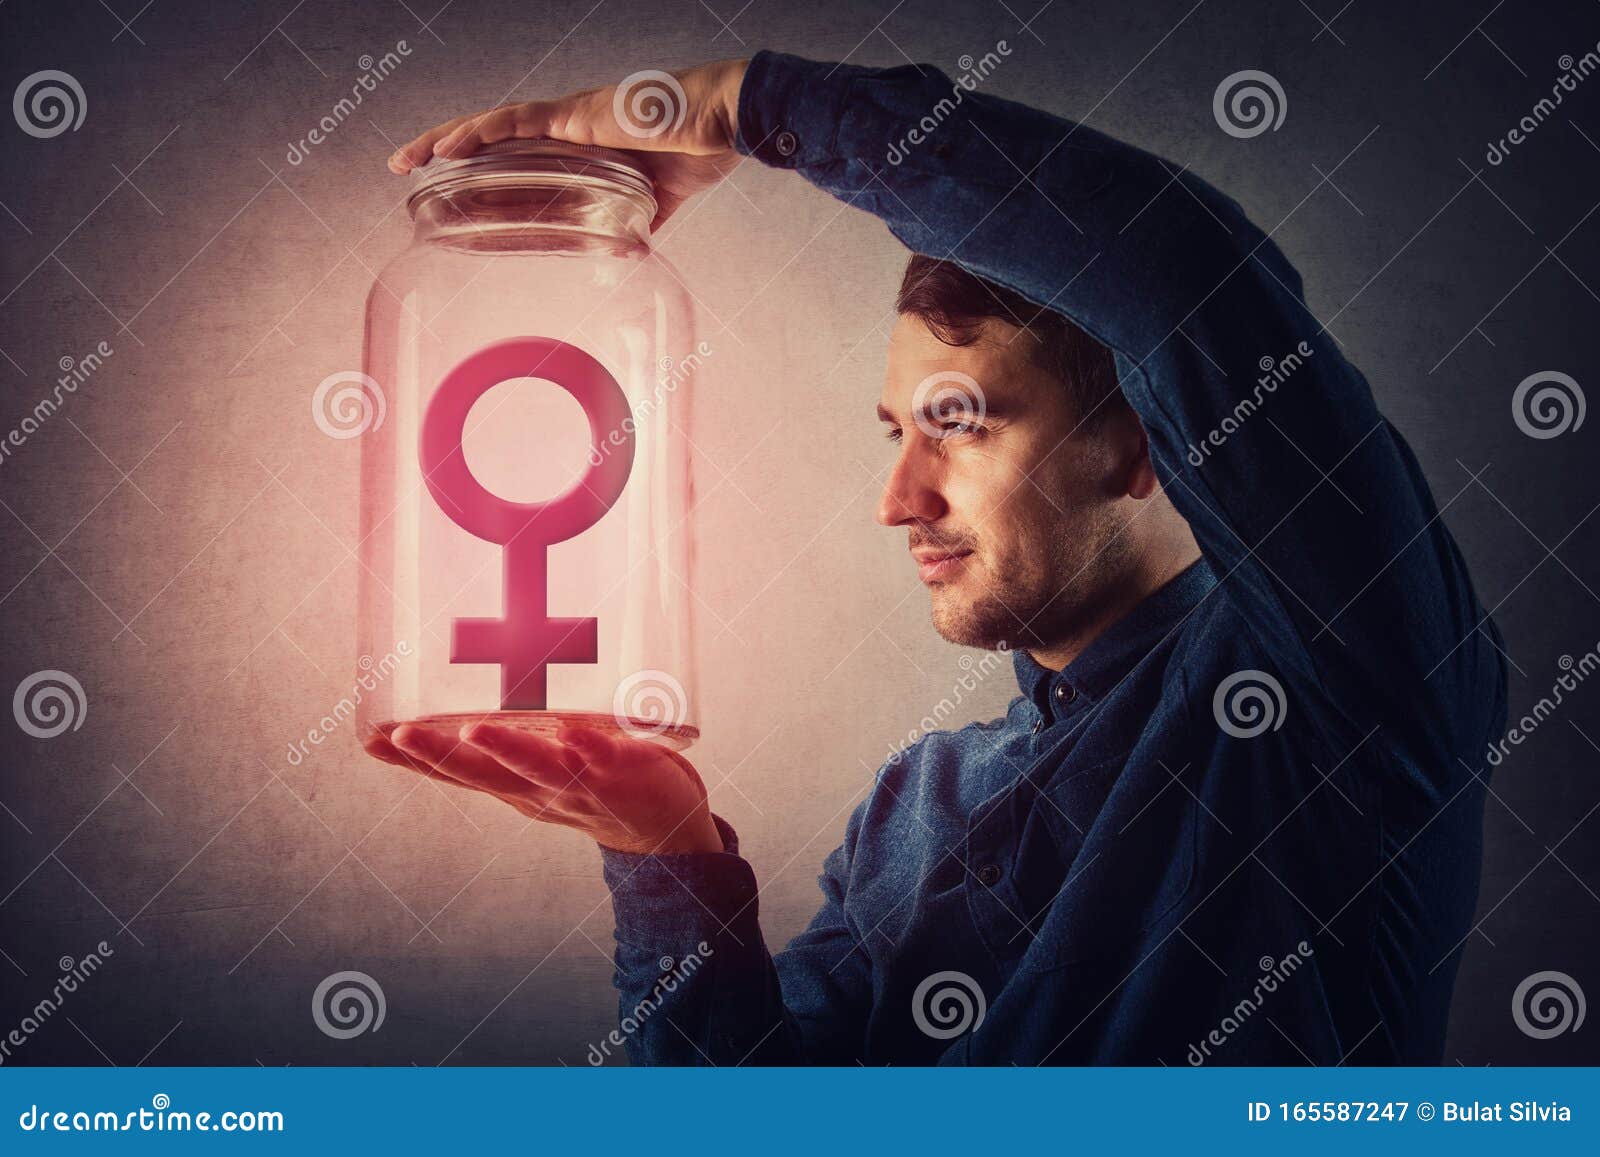 young male, malefic look holding a glass jar with female gender  inside as captive. man pretending to be superior to woman,